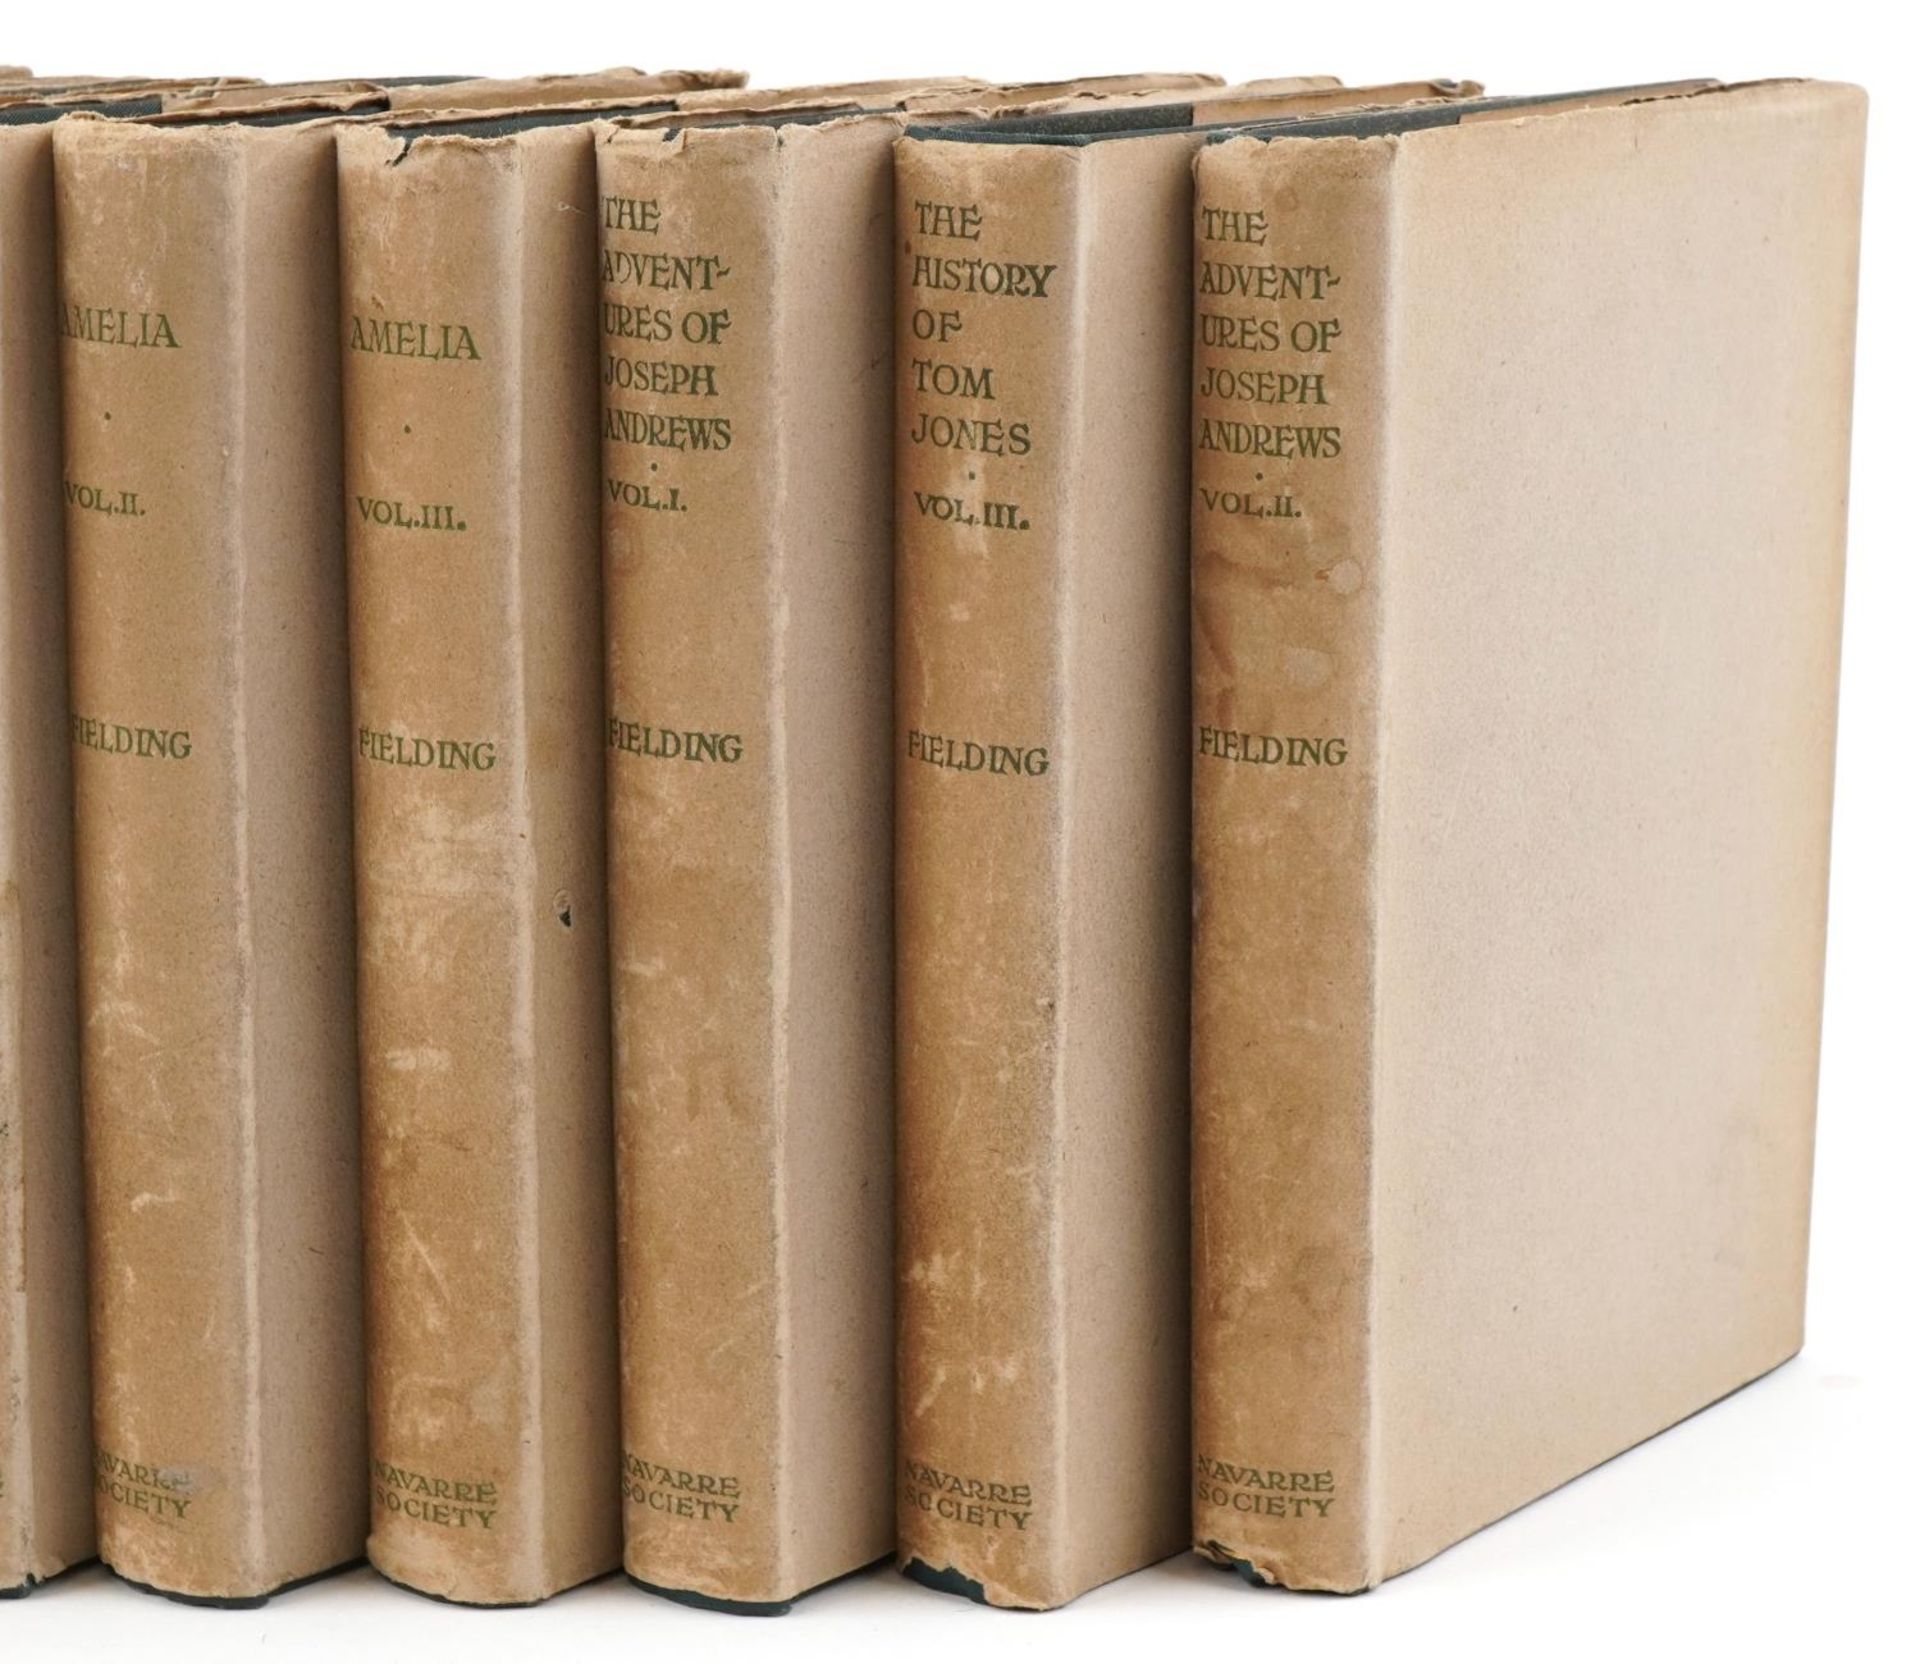 The Works of Henry Fielding, set of twelve Navarre Society hardback books with dust jackets - Image 5 of 10